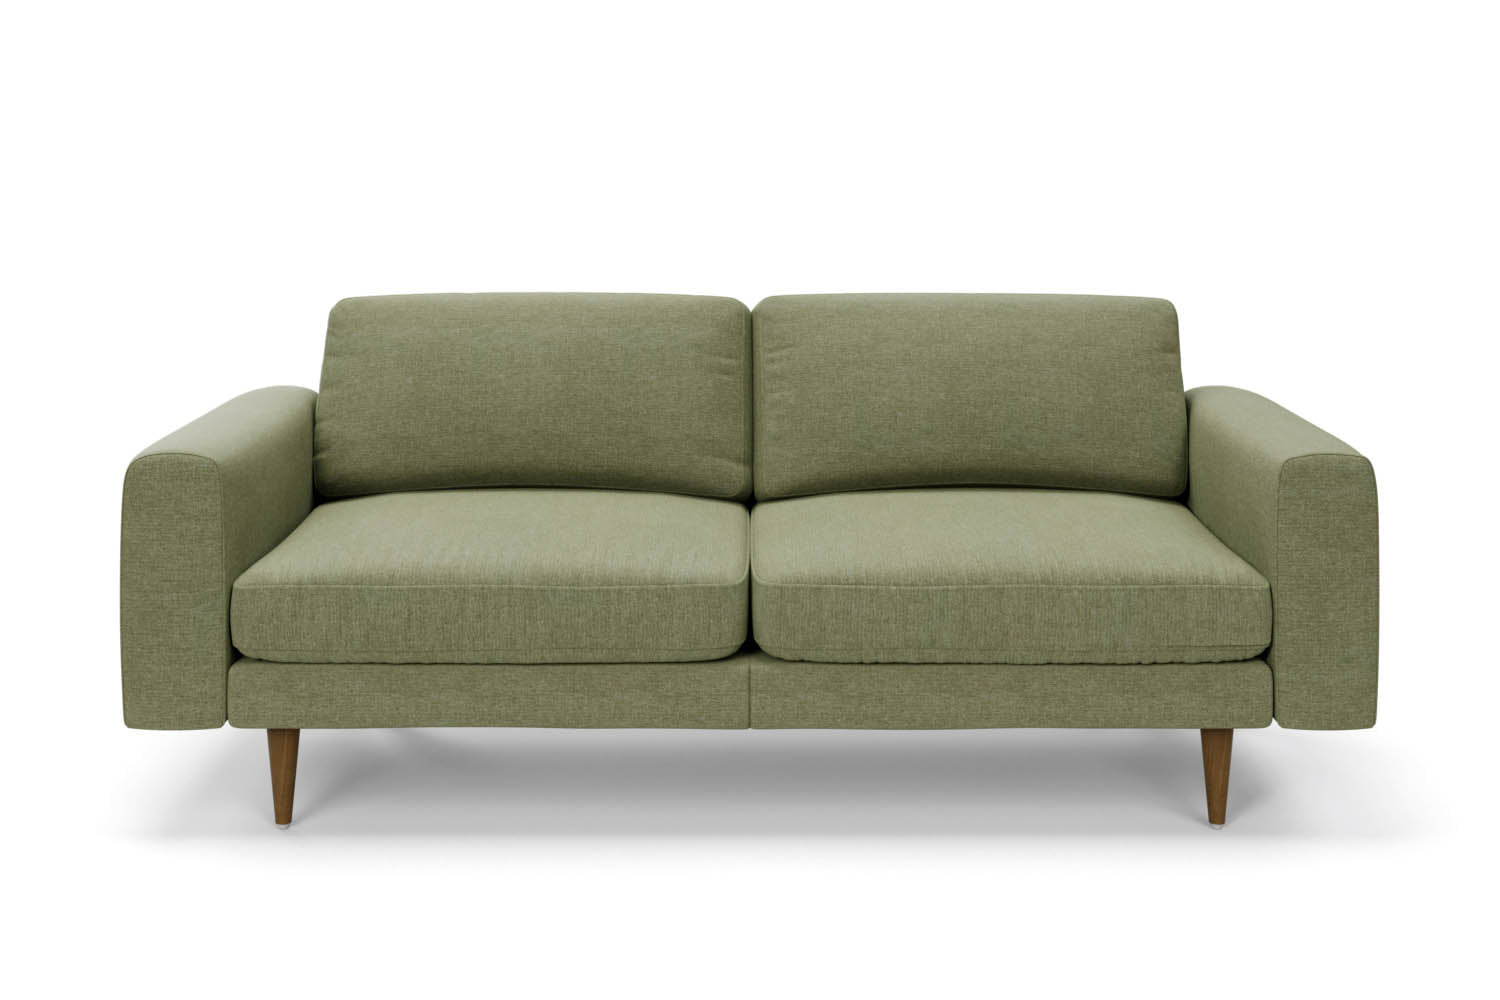 The Big Chill 3 Seater Sofa in Sage Chenille with brown legs front variant_40886318006320